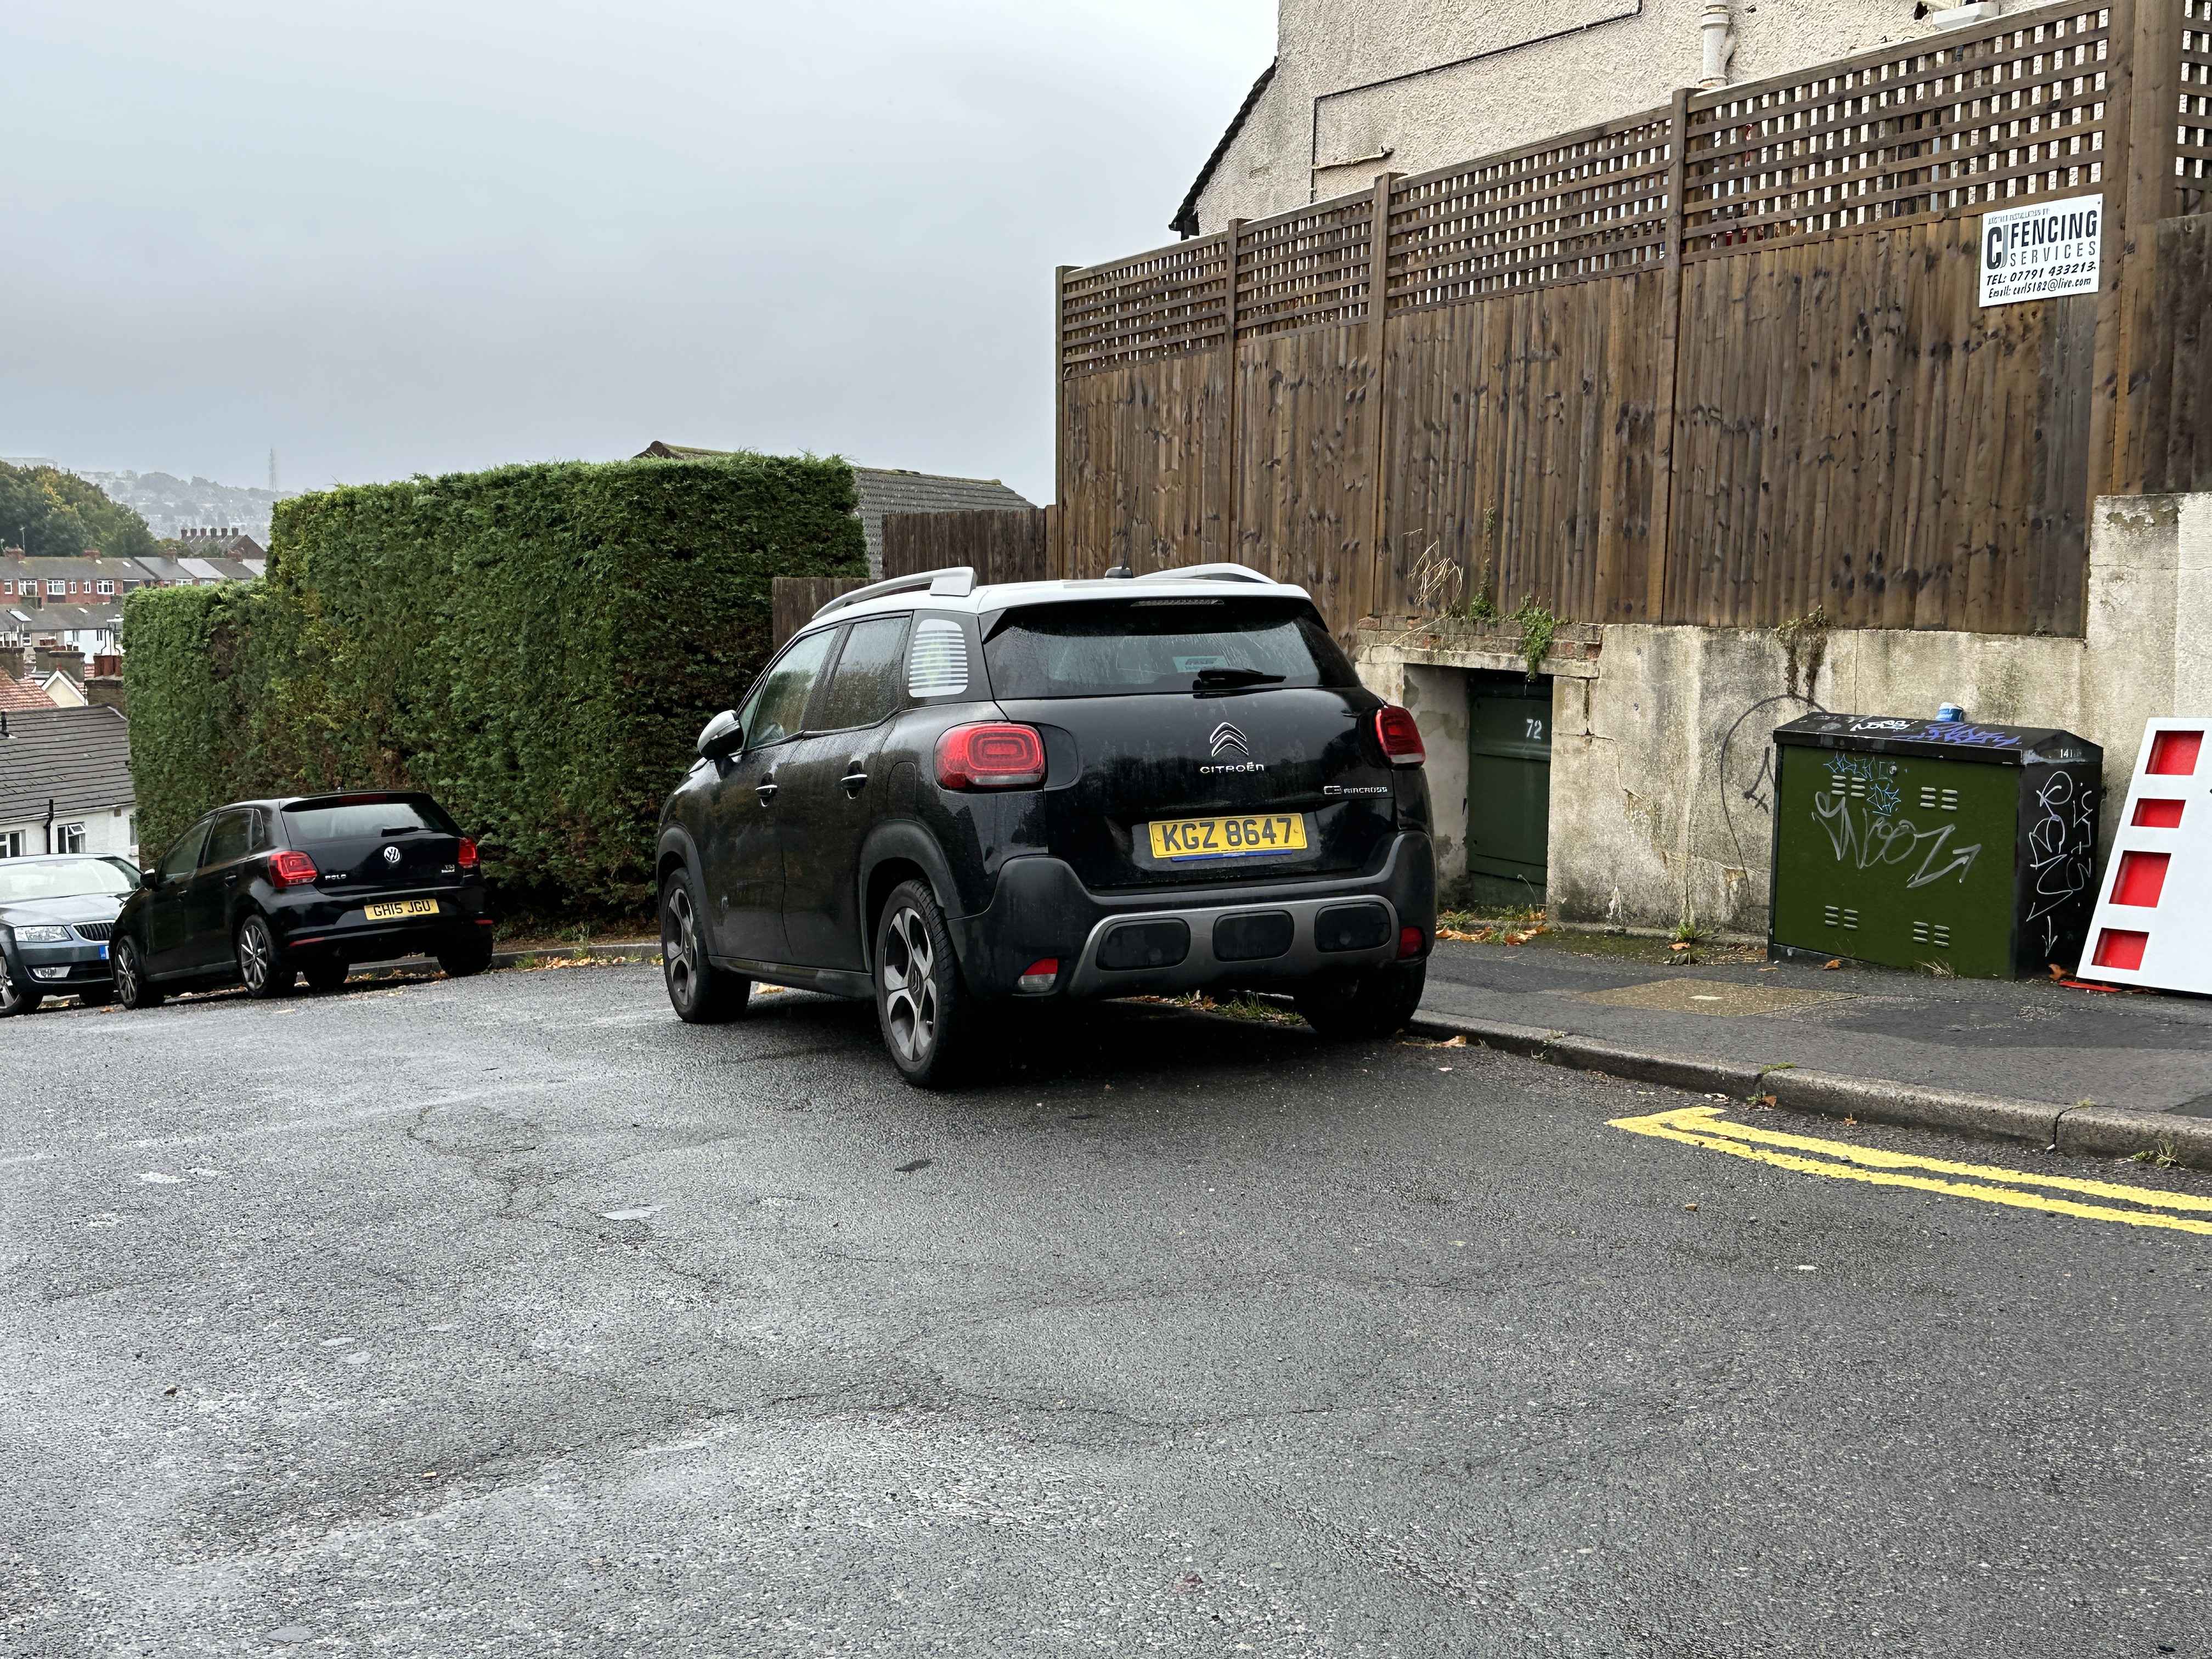 Photograph of KGZ 8647 - a Black Citroen C3 parked in Hollingdean by a non-resident who uses the local area as part of their Brighton commute. The second of five photographs supplied by the residents of Hollingdean.